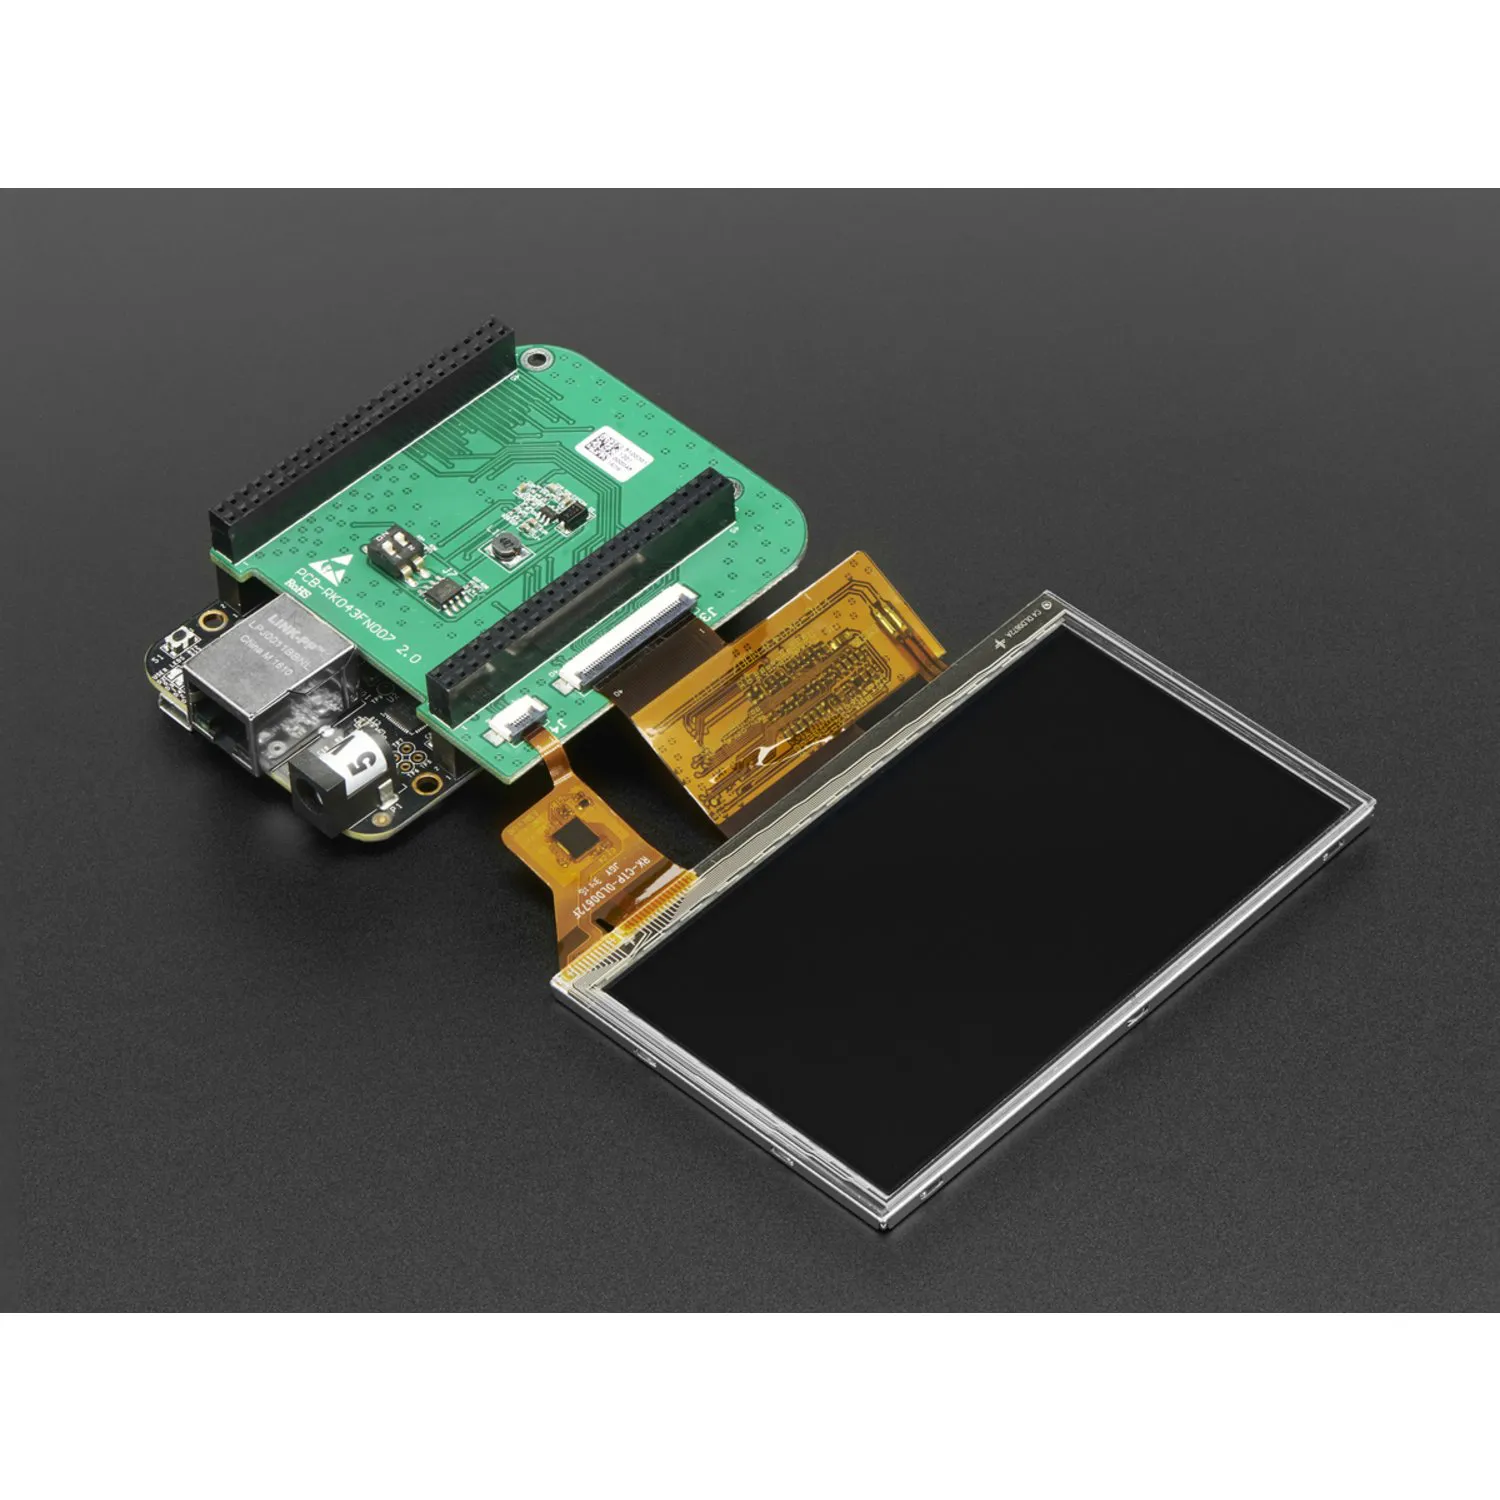 Photo of 4.3 LCD Capacitive Touchscreen Display Cape for BeagleBone